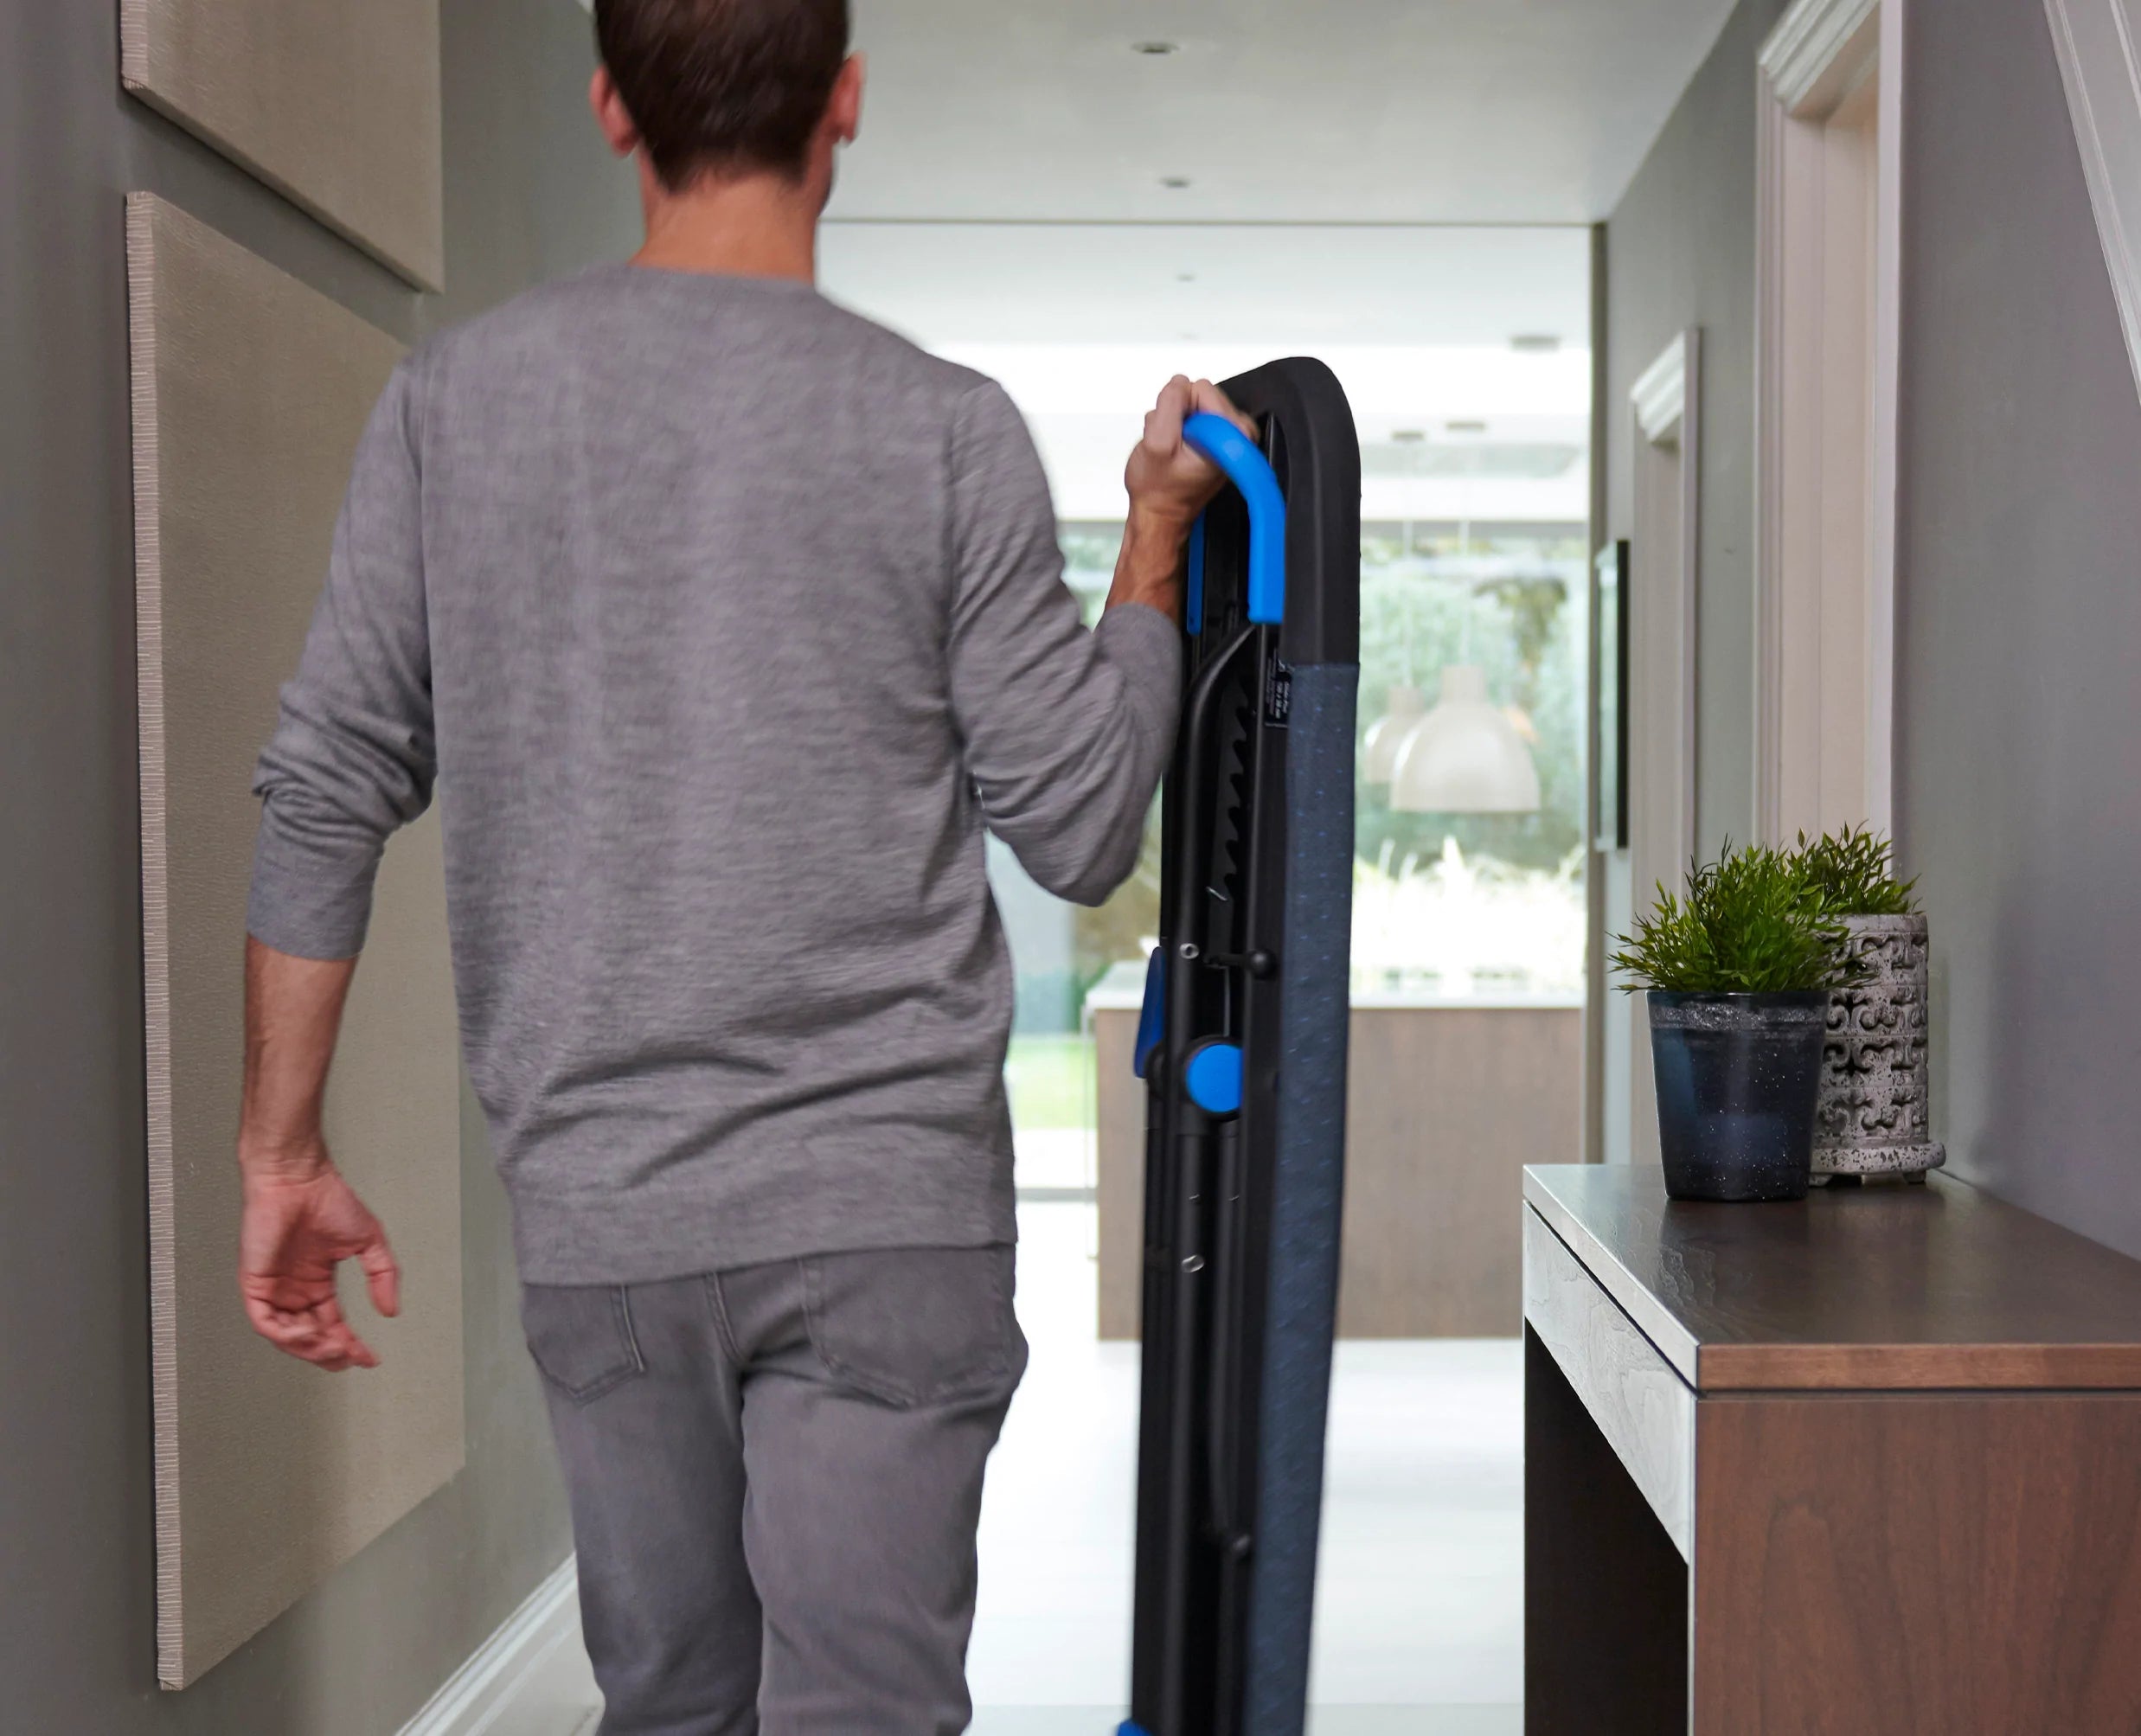 Glide Plus Easy-store Ironing Board - Image 3